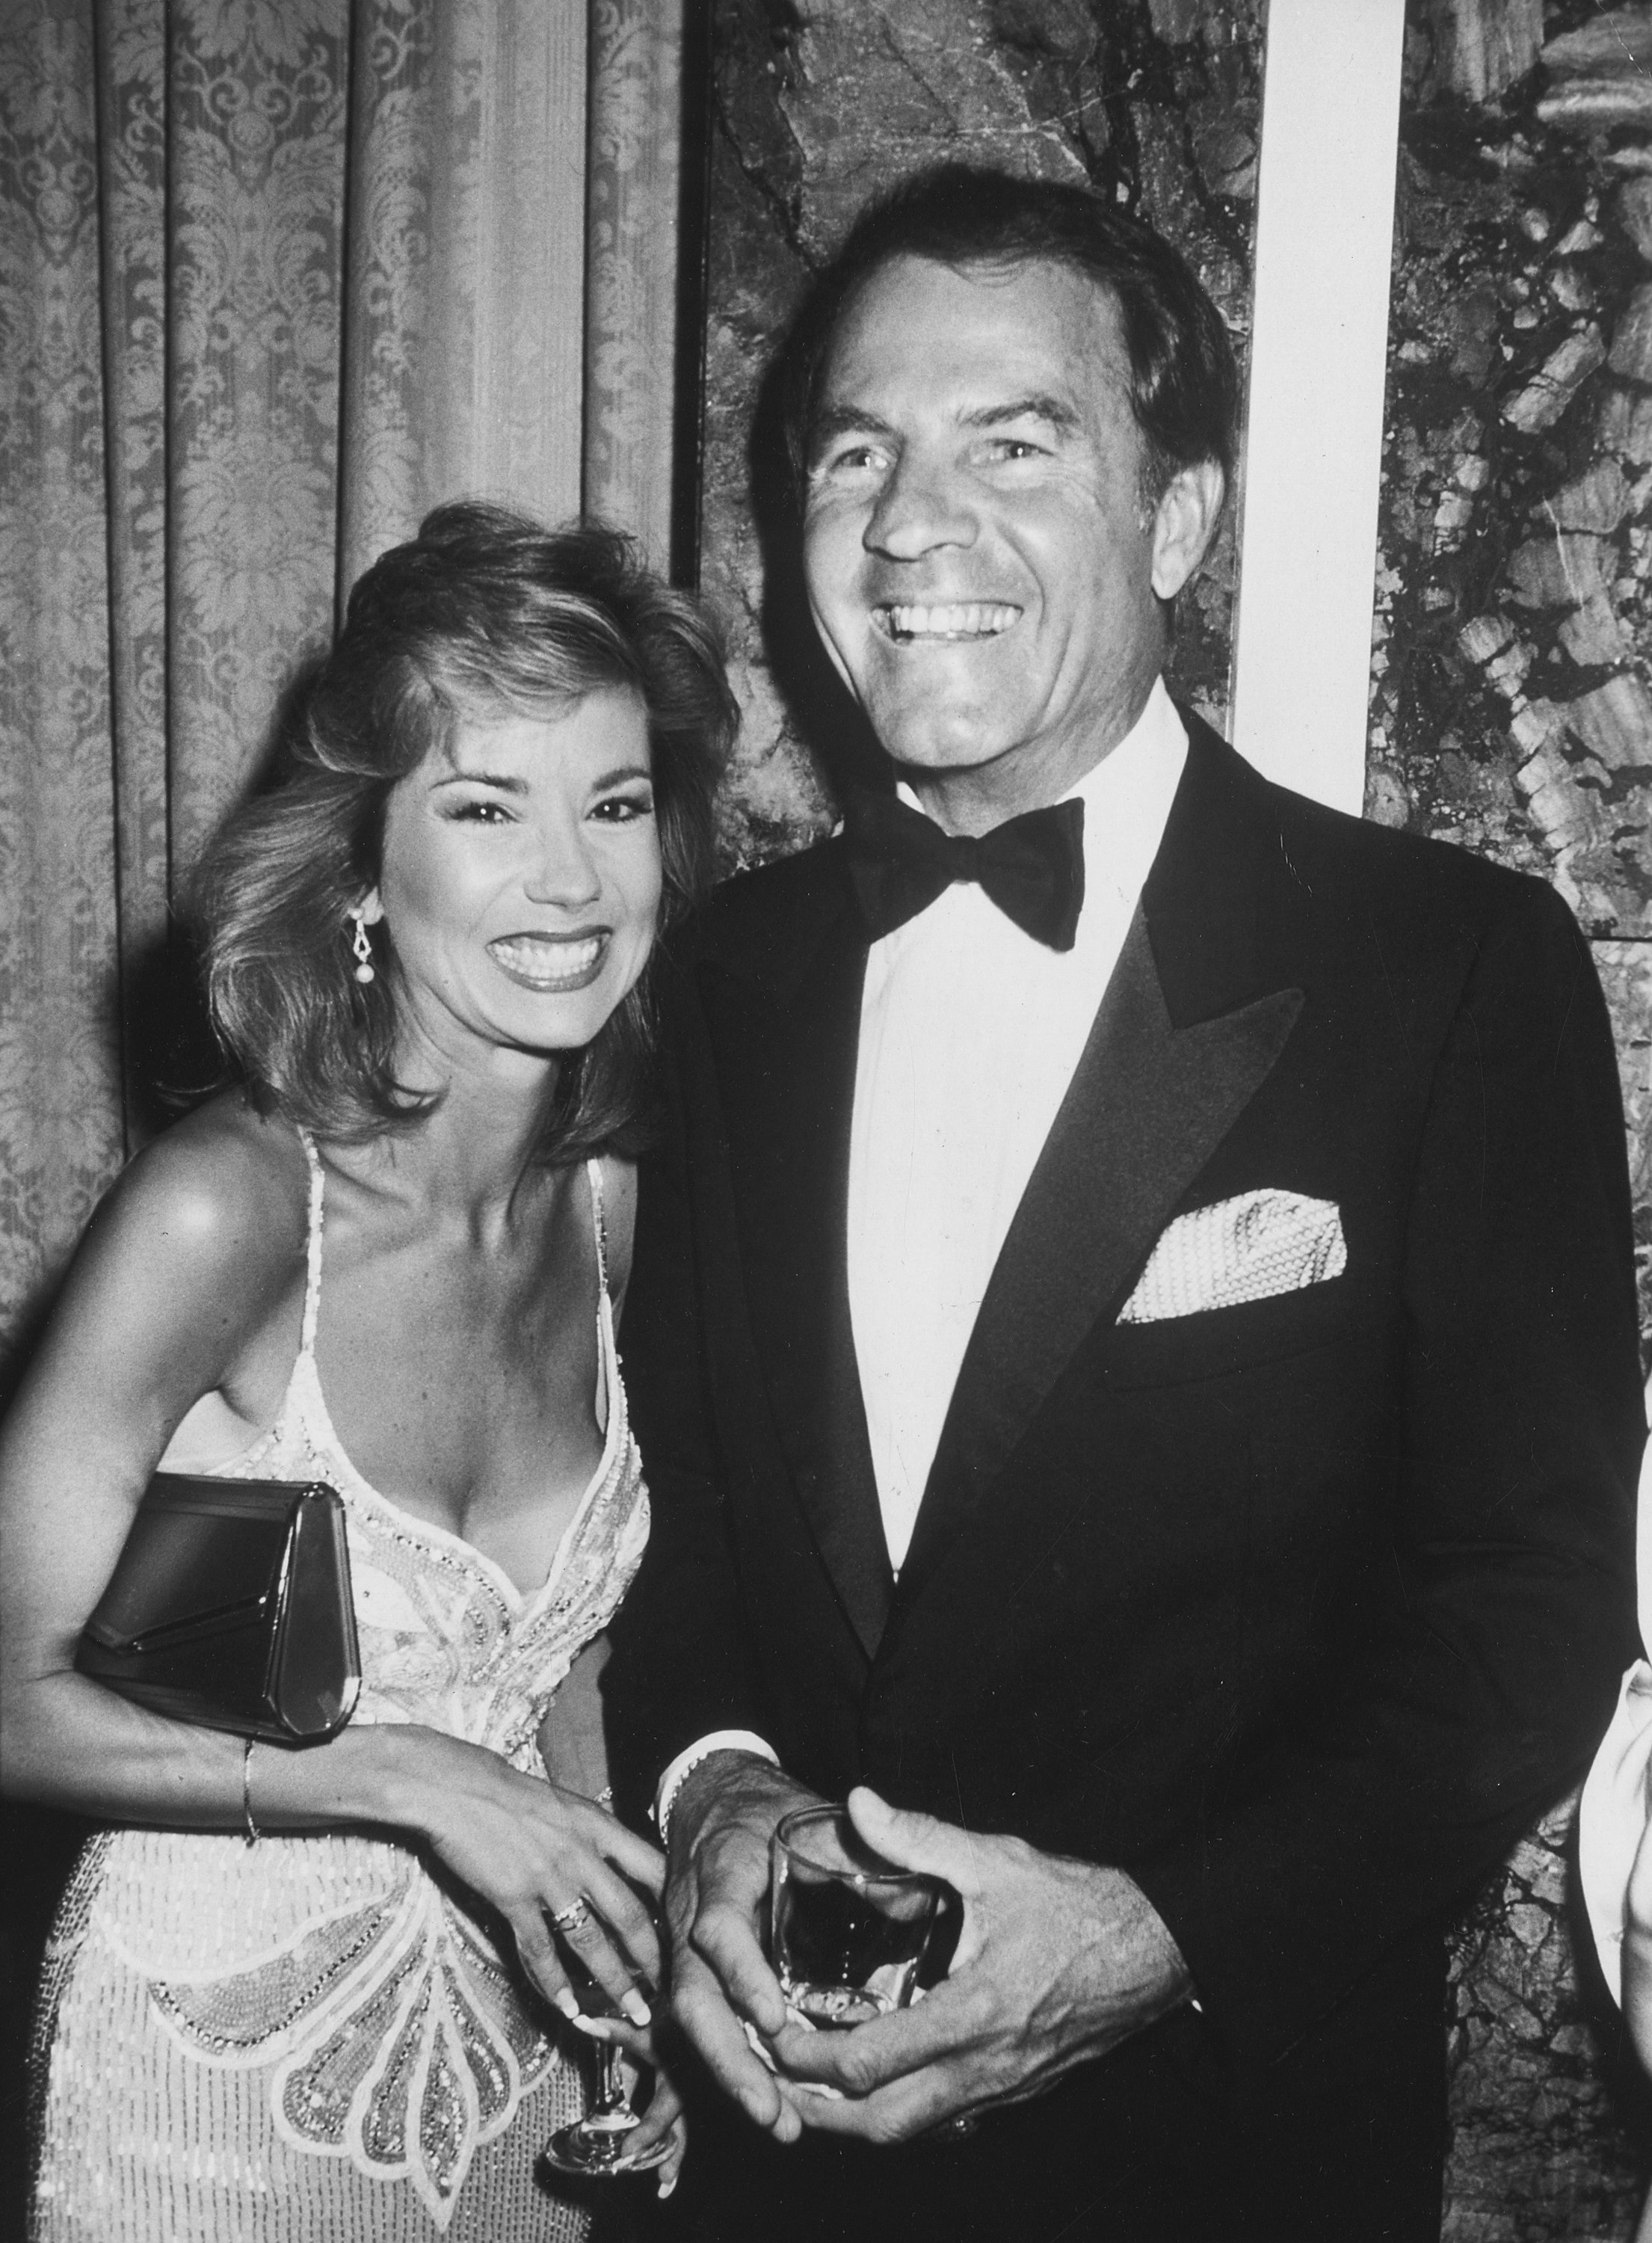 Kathie Lee Johnson and Frank Gifford at the B'nai B'rith International Awards Dinner on June 24, 1986, in New York City. | Source: Ron Galella, Ltd./Ron Galella Collection/Getty Images